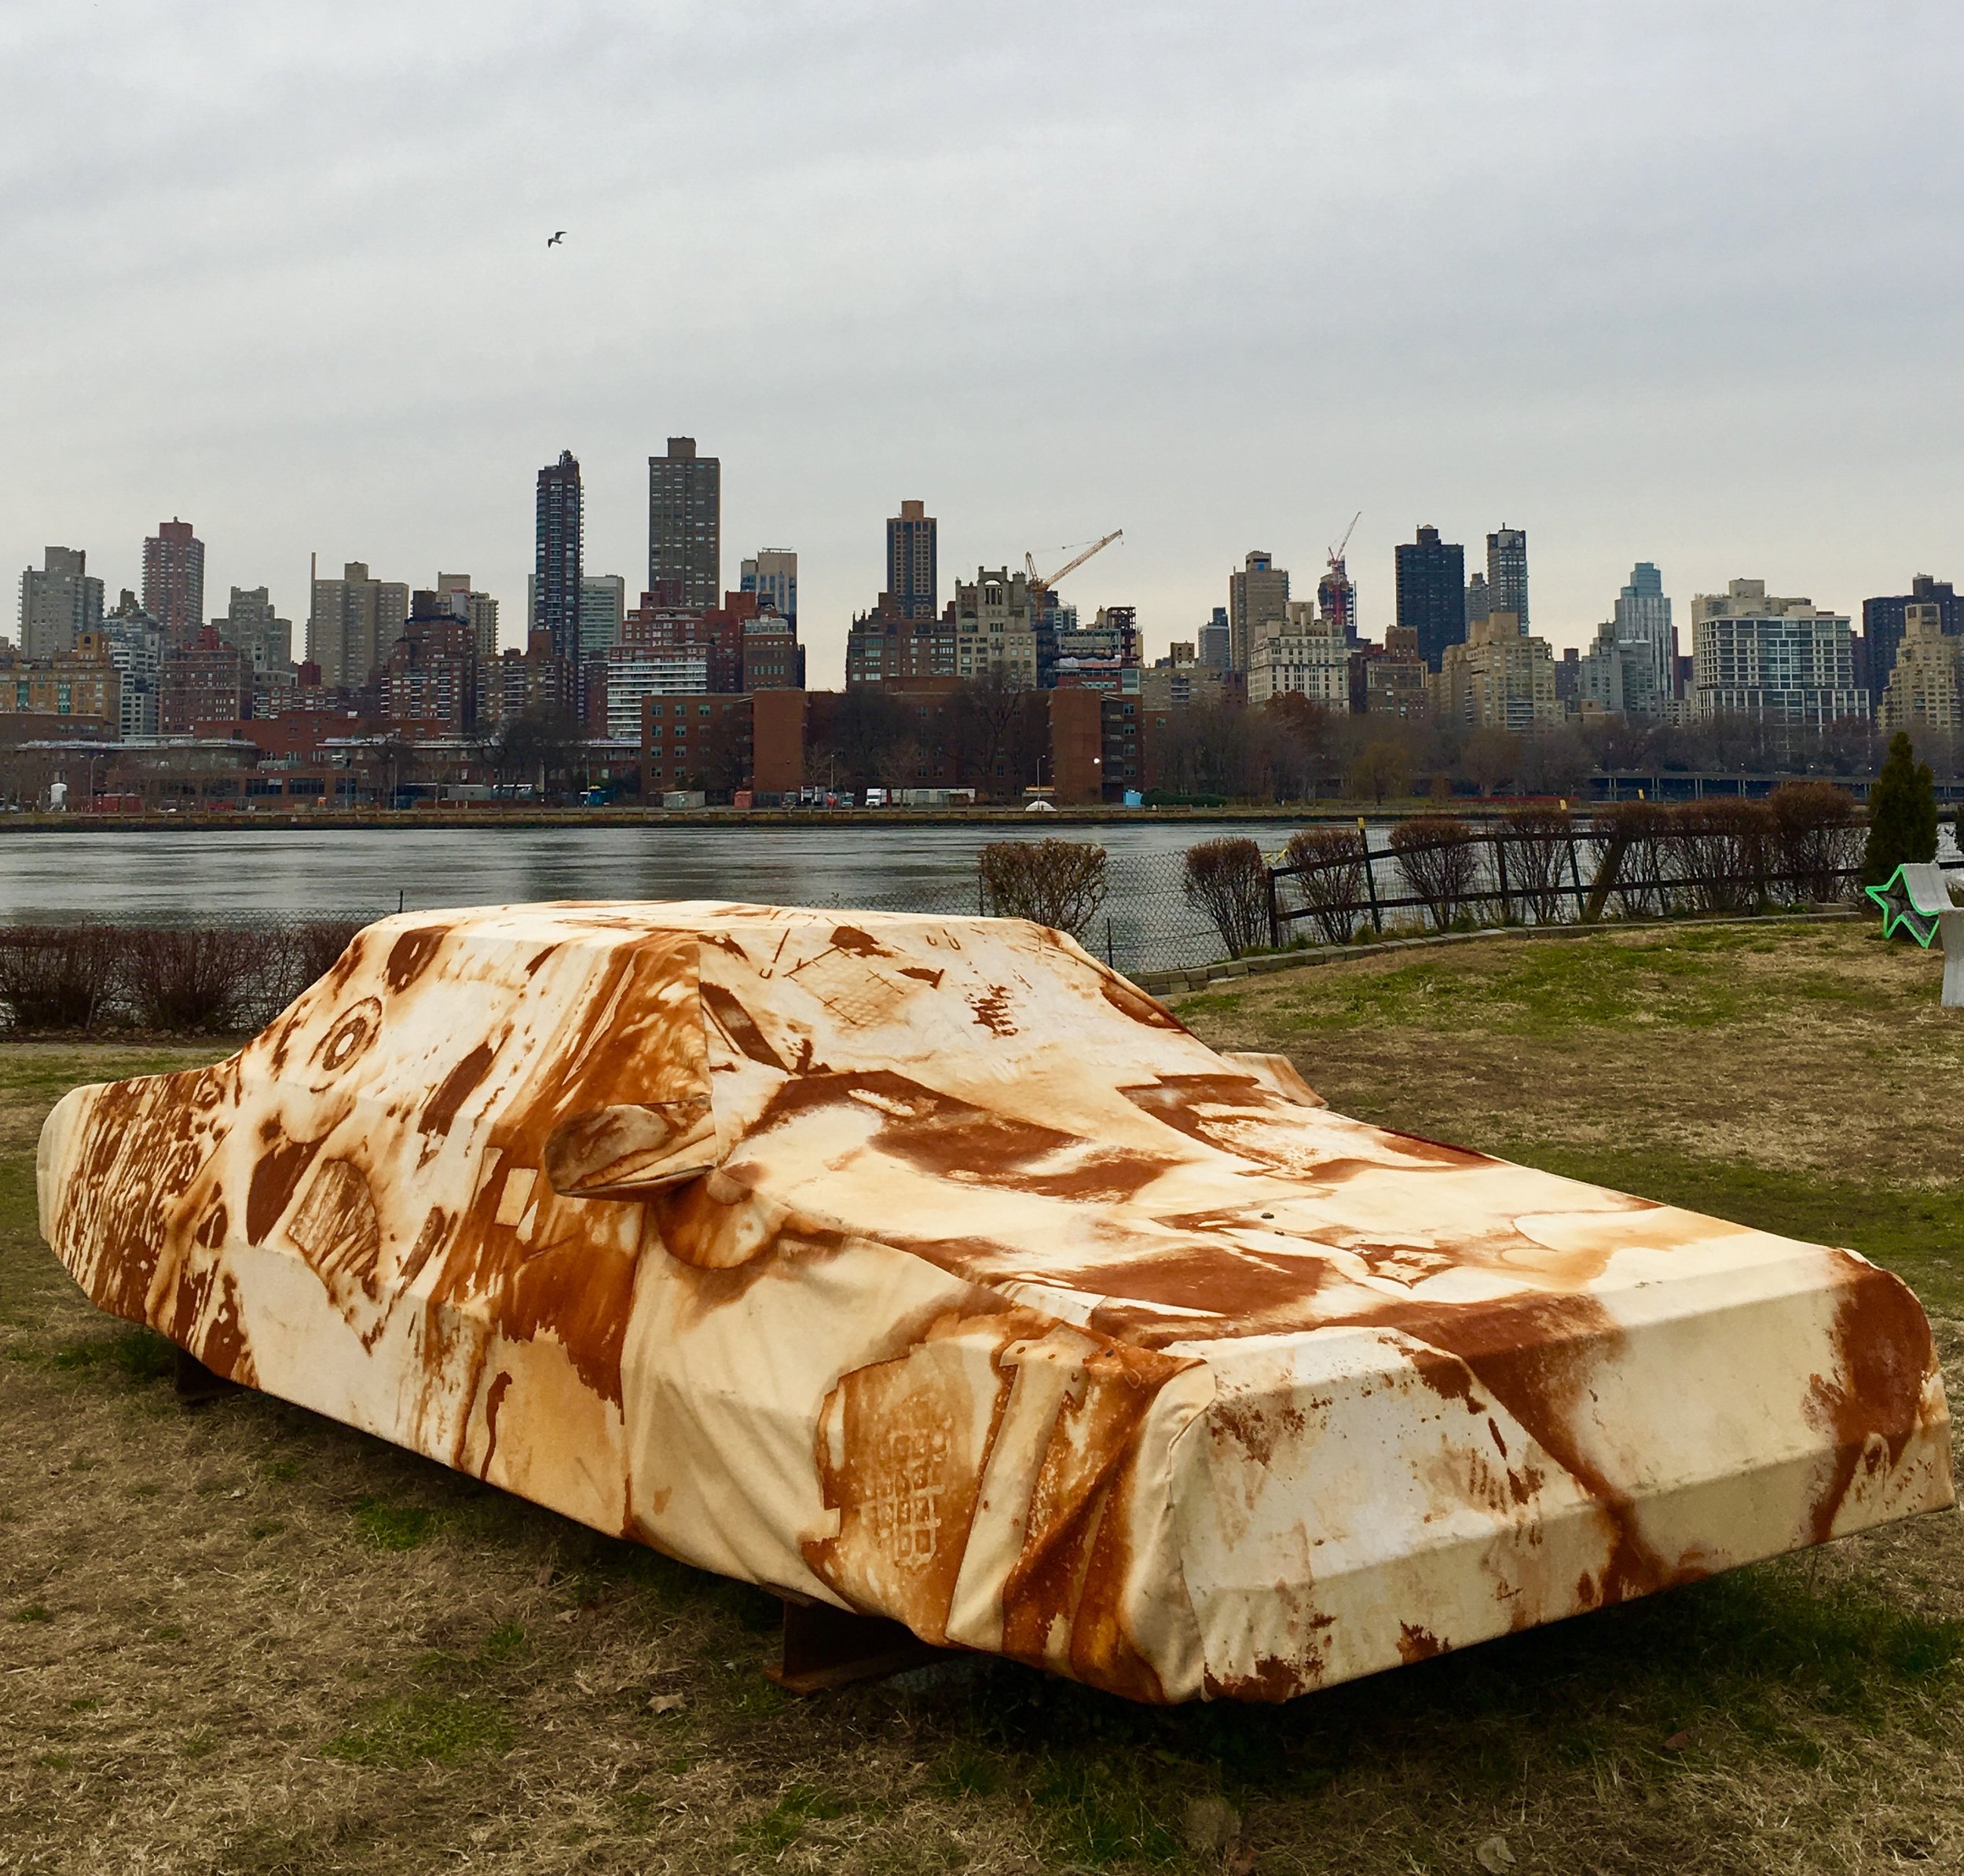  Park on Long Island City's waterfront. “Into the ground,” the eye-catching sculpture in the foreground, is by artists Joe Riley and Audrey Snyder.  